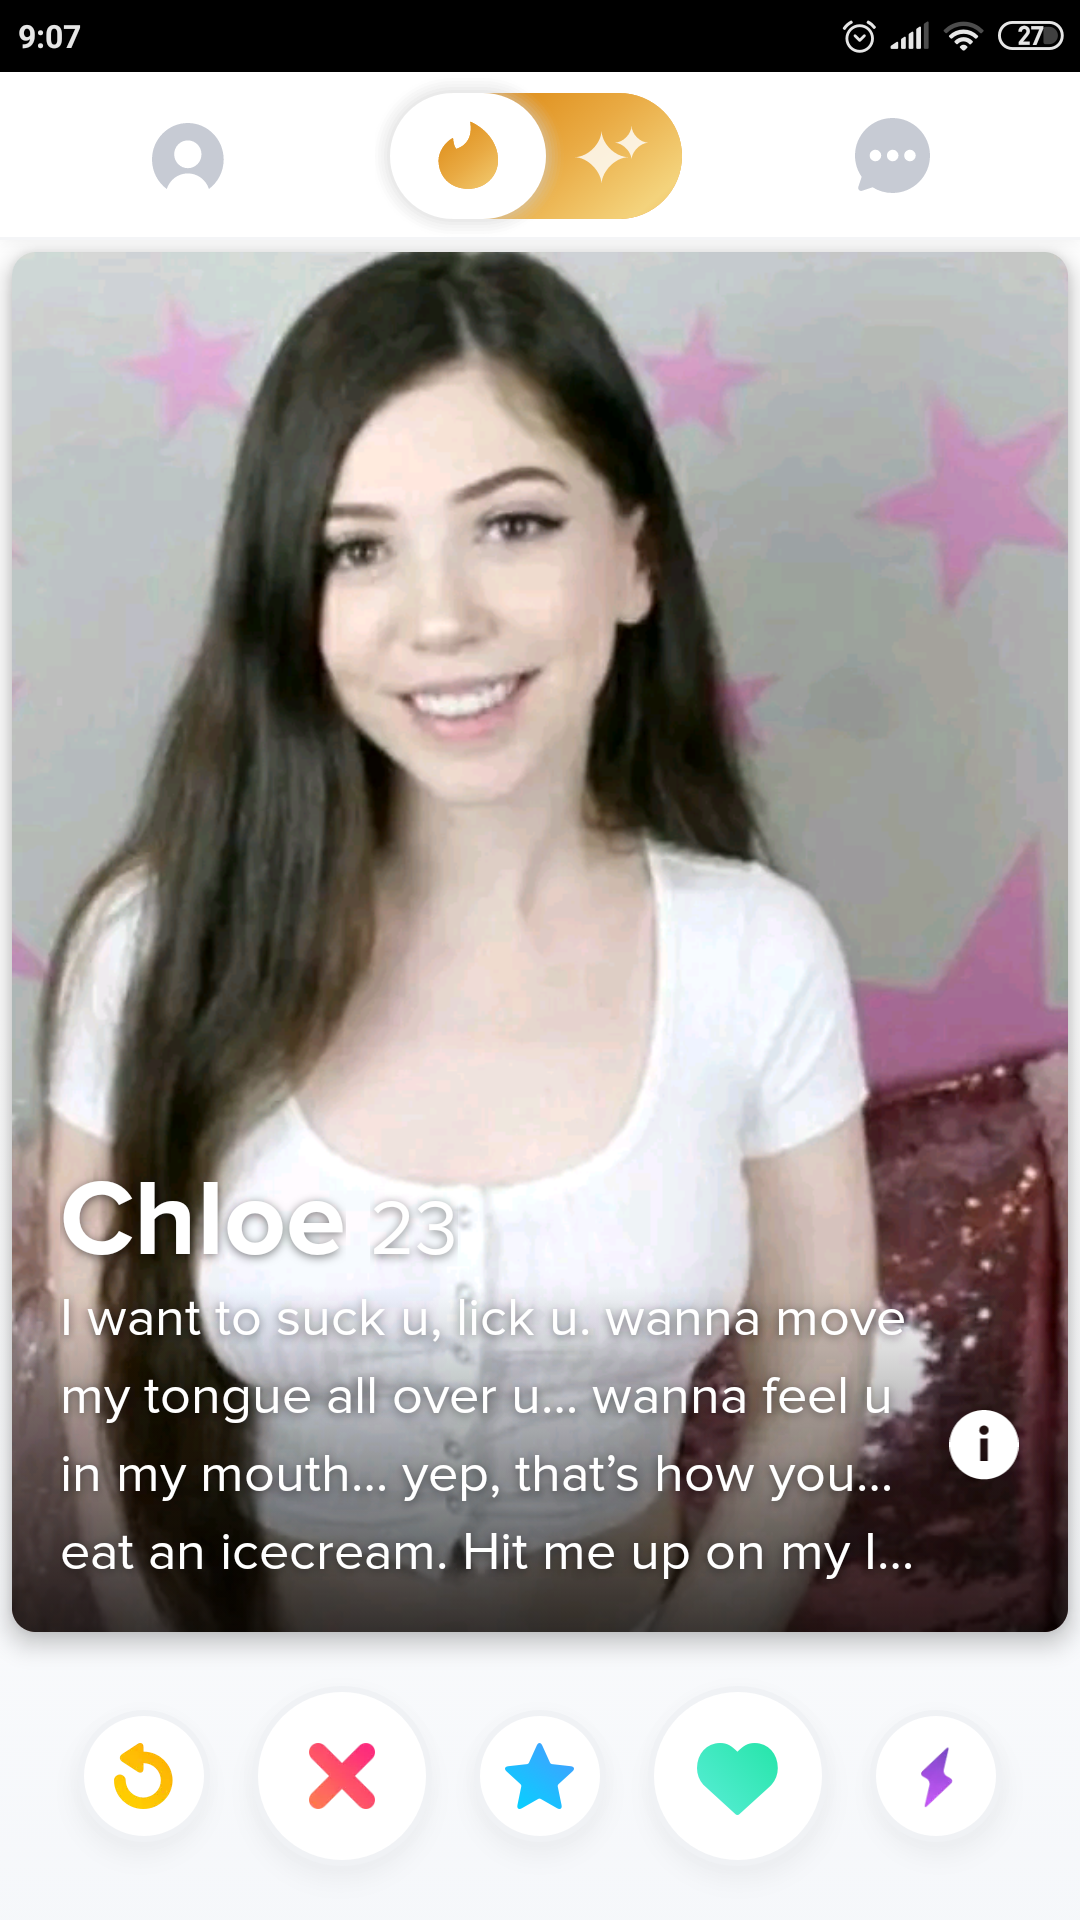 Chloe 23 want to suck dick u wanna mover my tongue all over u... wanna feel ut in my mouth... yep, that's how you... eat an icecream. Hit me up on my ...